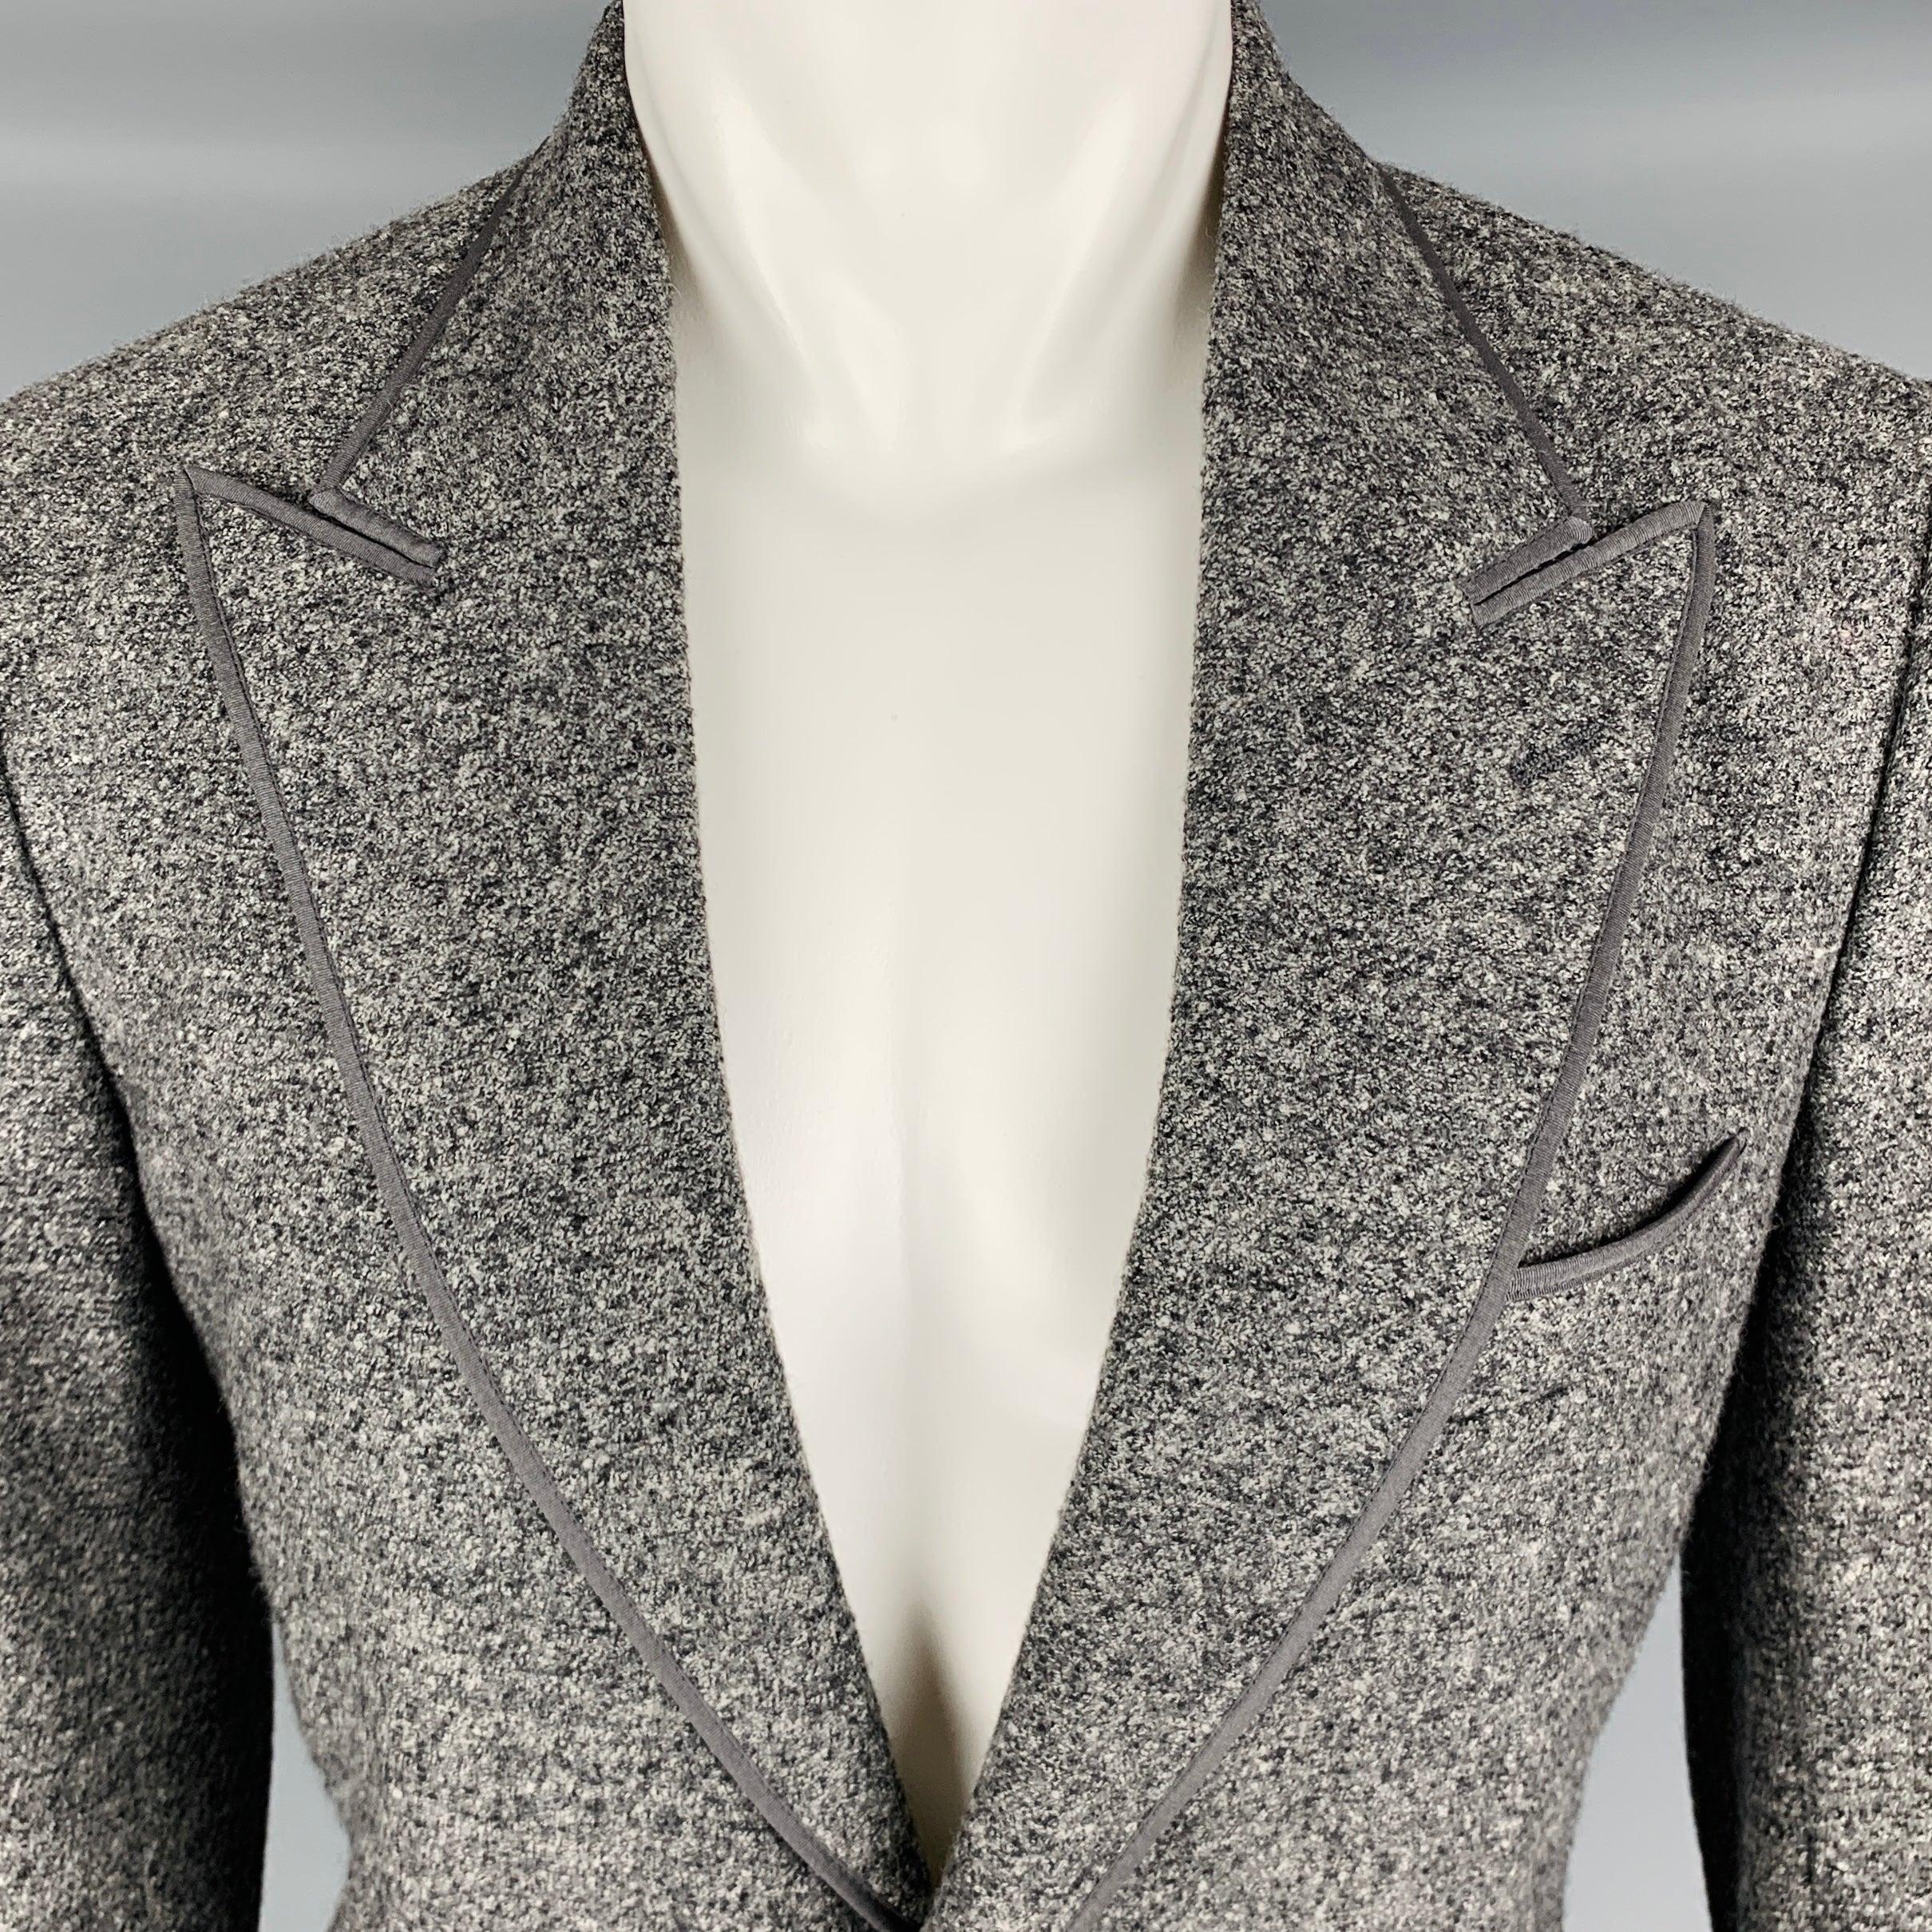 DOLCE & GABBANA sport coat
in a heather grey and black wool fabric featuring peak lapel, double vented back, and double button closure. Made in Italy.Very Good Pre-Owned Condition. Marks under arms. 

Marked:   IT 50 

Measurements: 
 
Shoulder: 17